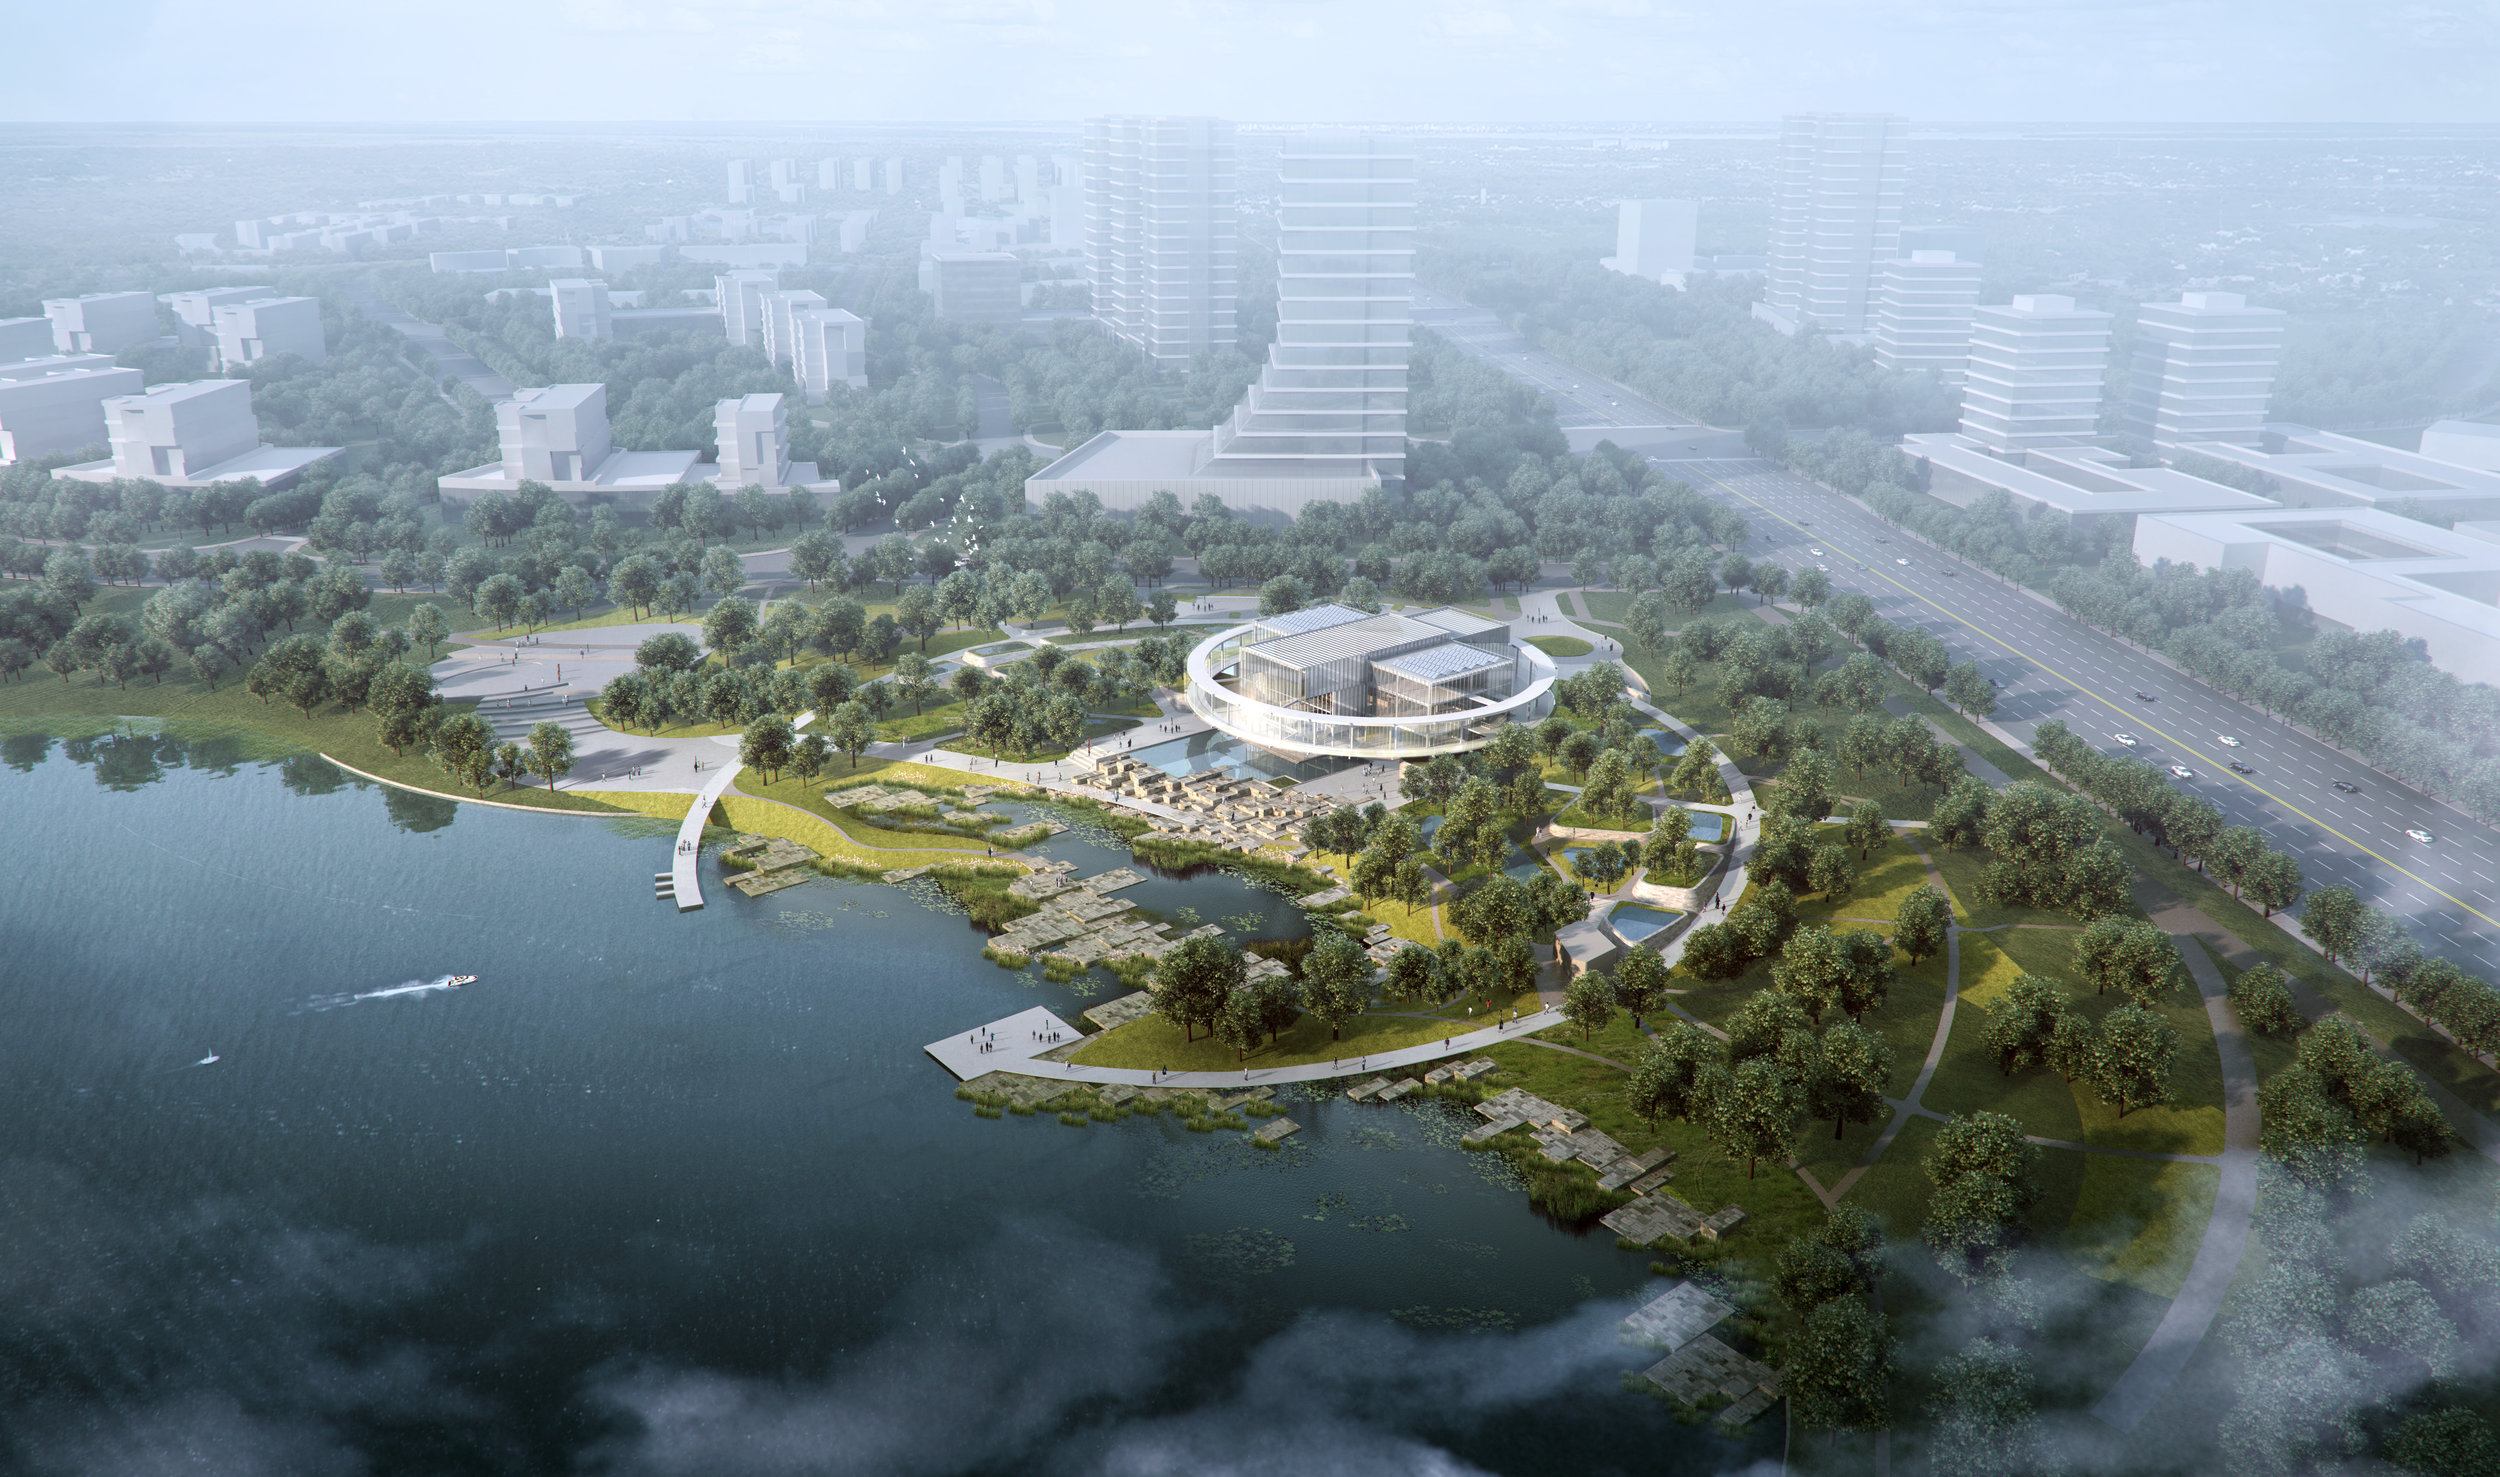   The harmonious existence of people and nature is represented in a single design expression by integrating the architecture and landscape through topography and connection to water.&nbsp; The park space created will provide necessary relief from the